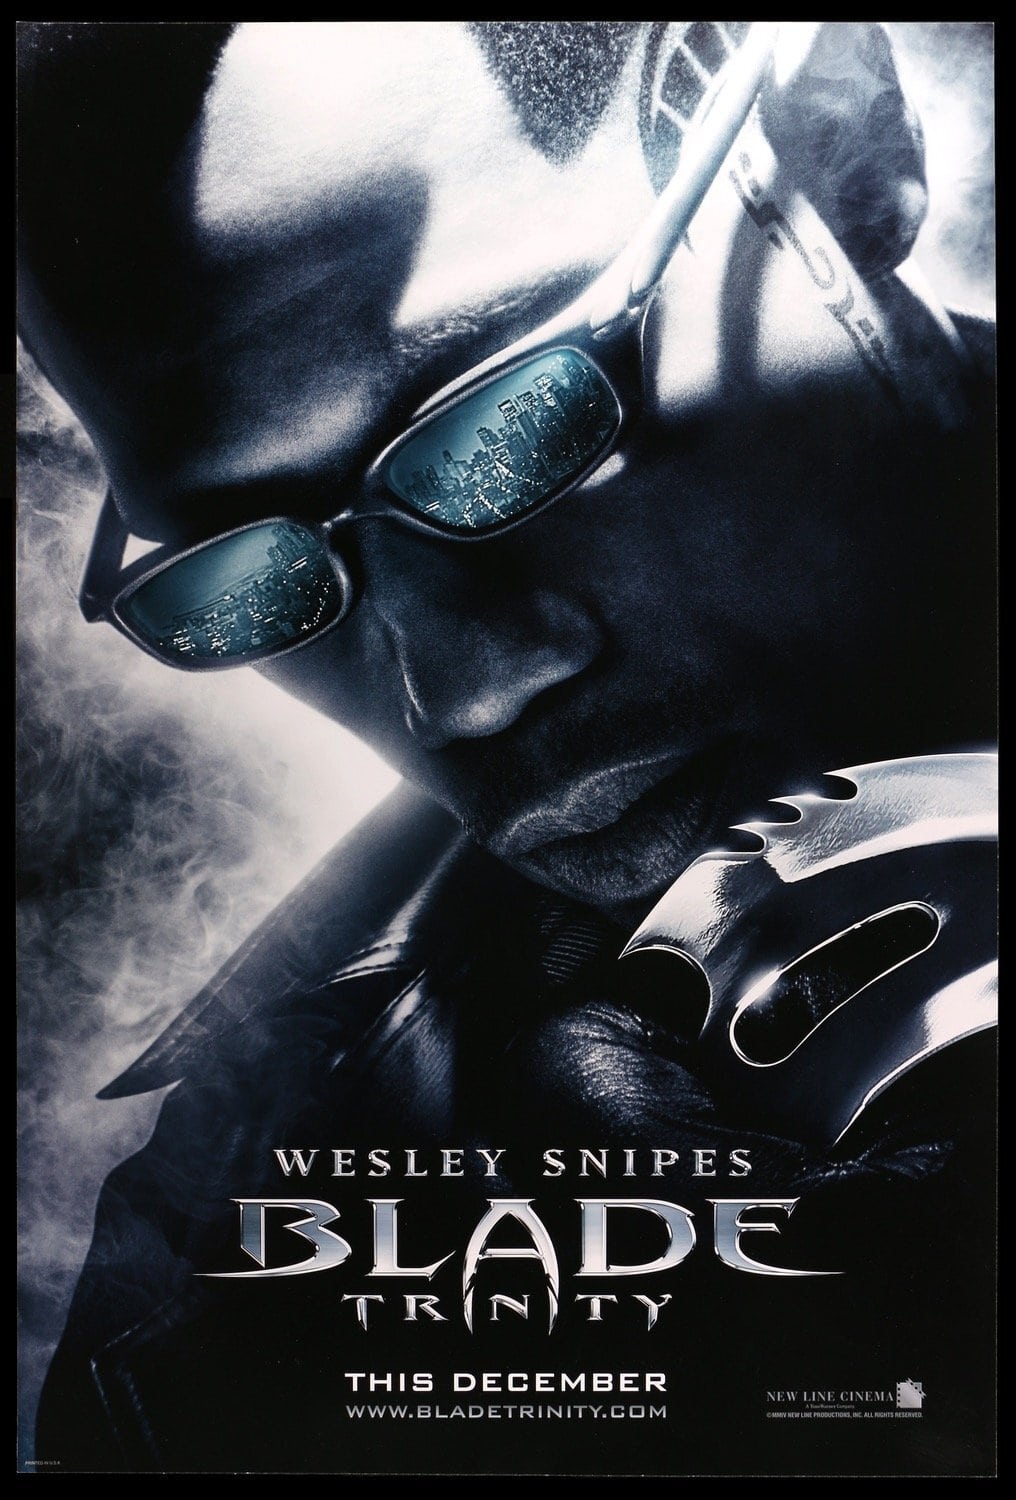 Nightstalkers, Daywalkers, and Familiars: Inside the World of 'Blade Trinity'